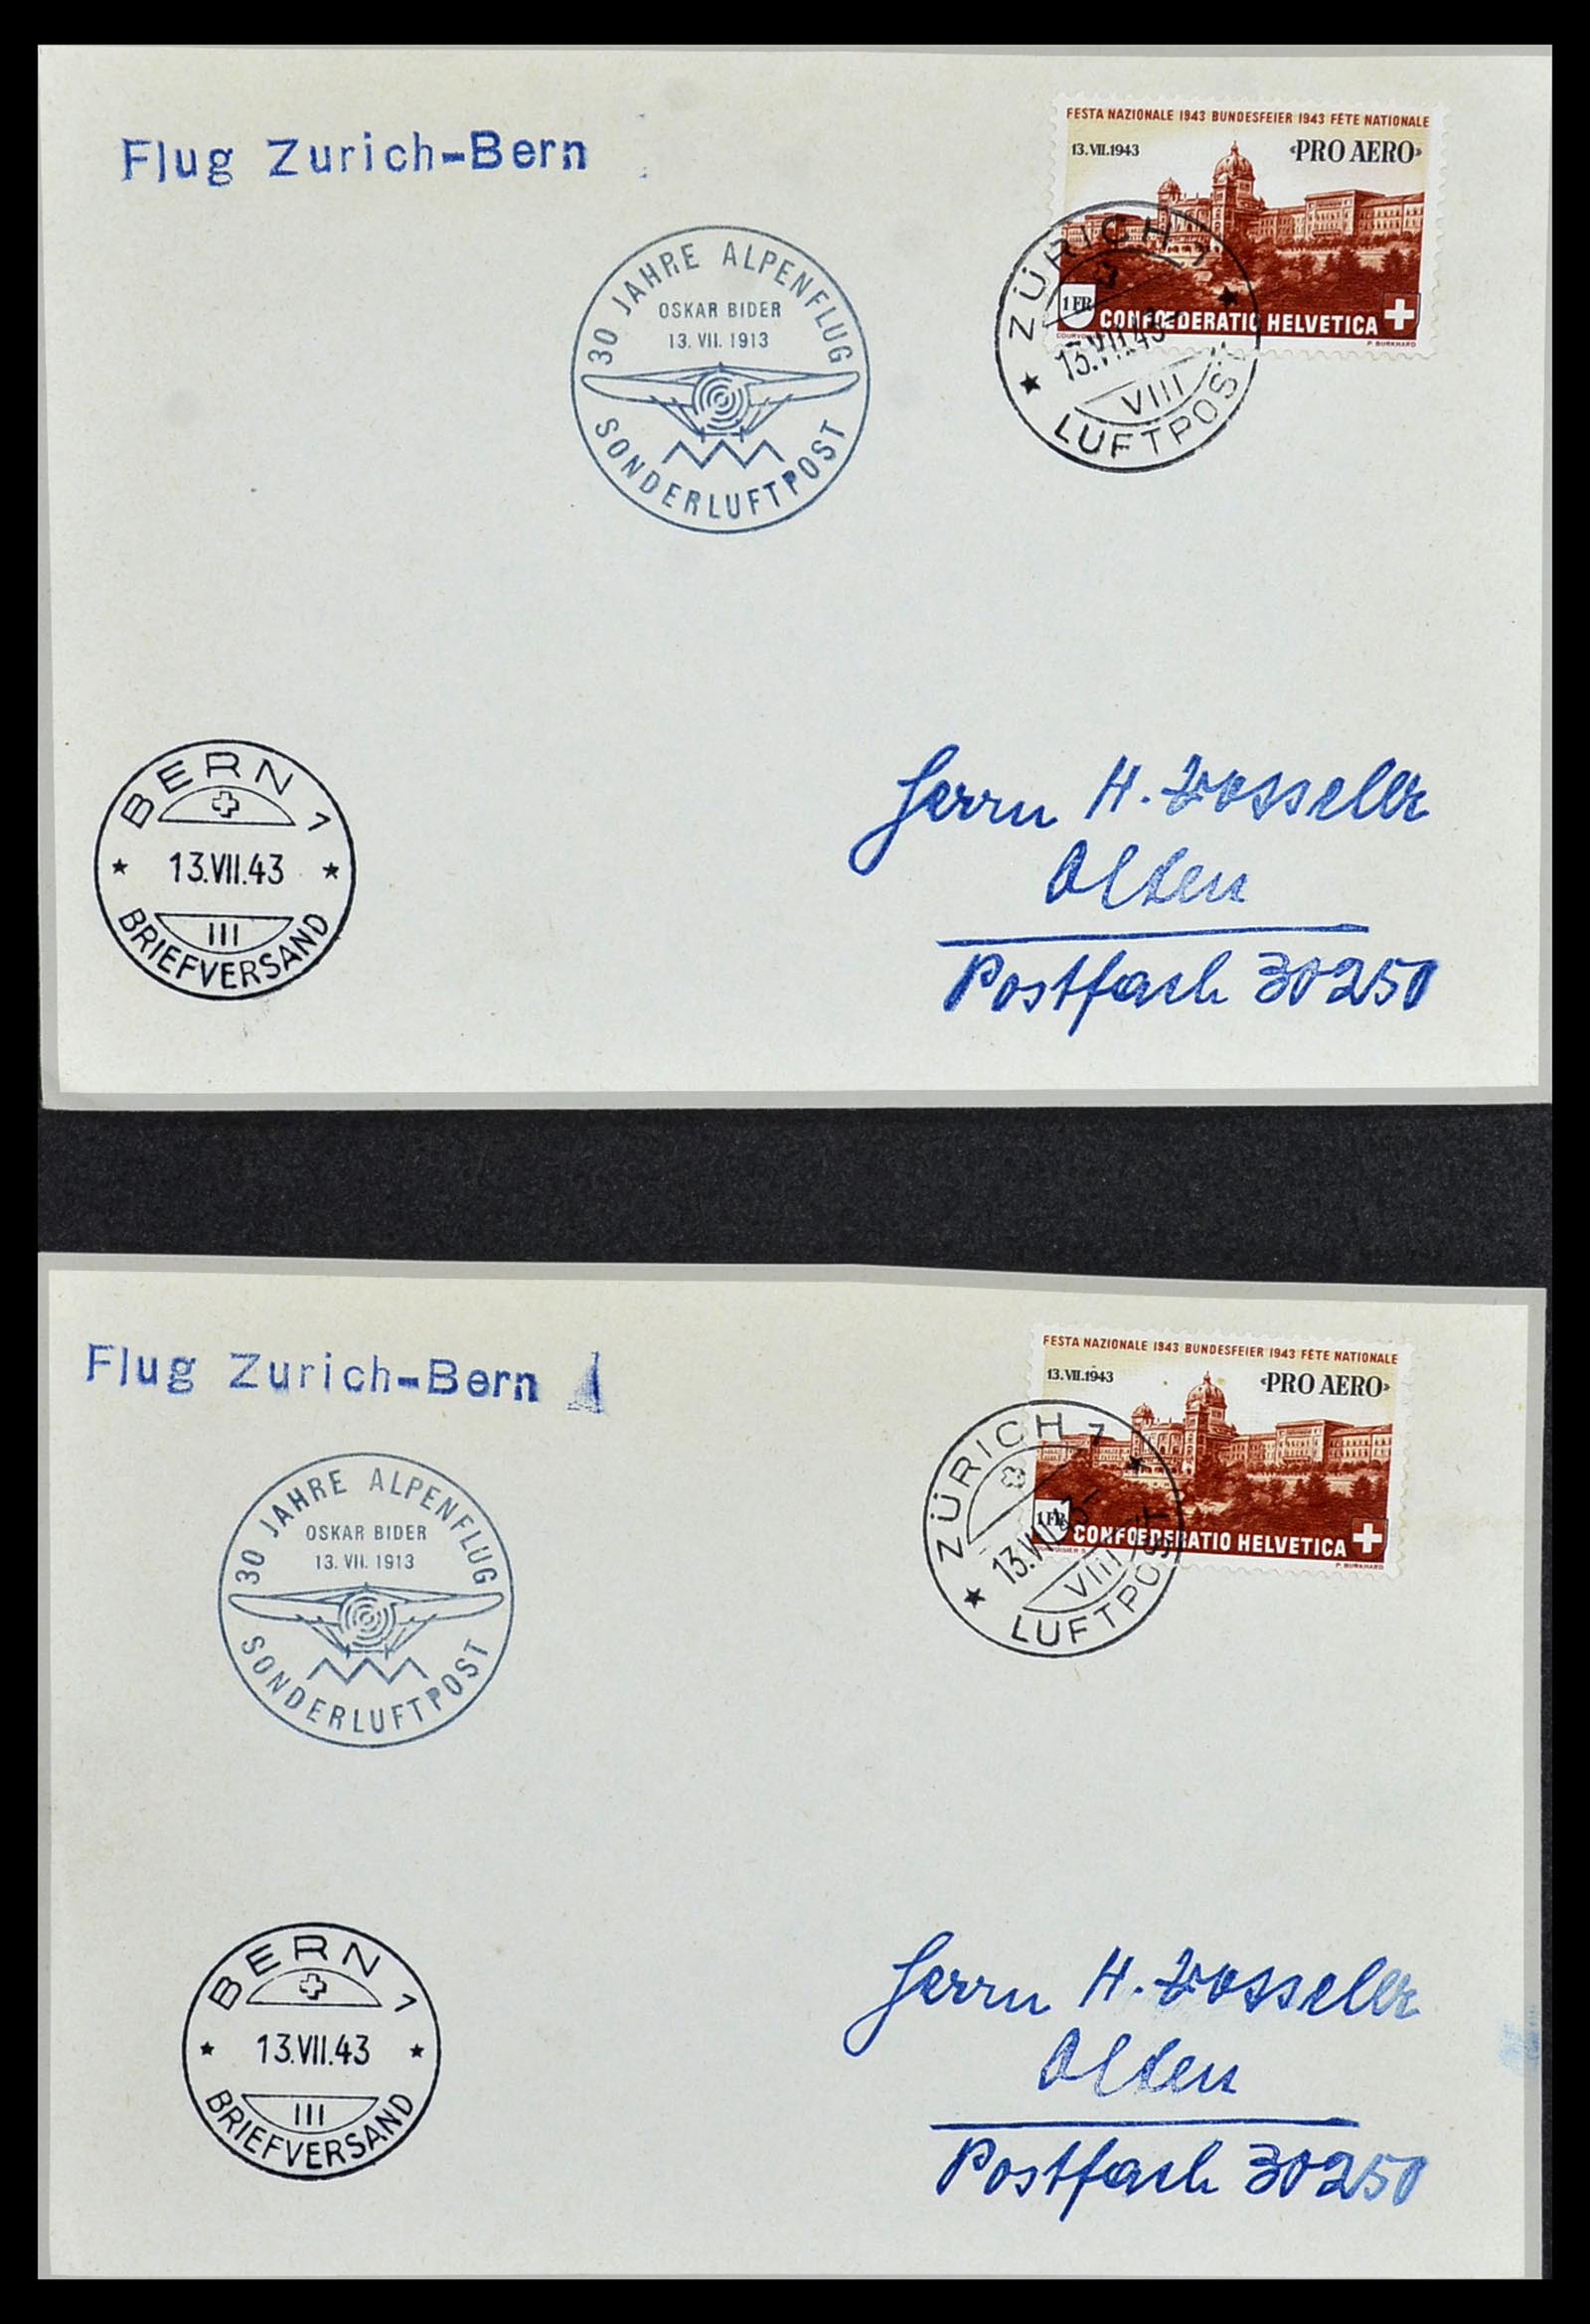 34141 088 - Stamp collection 34141 Switzerland airmail covers 1920-1960.